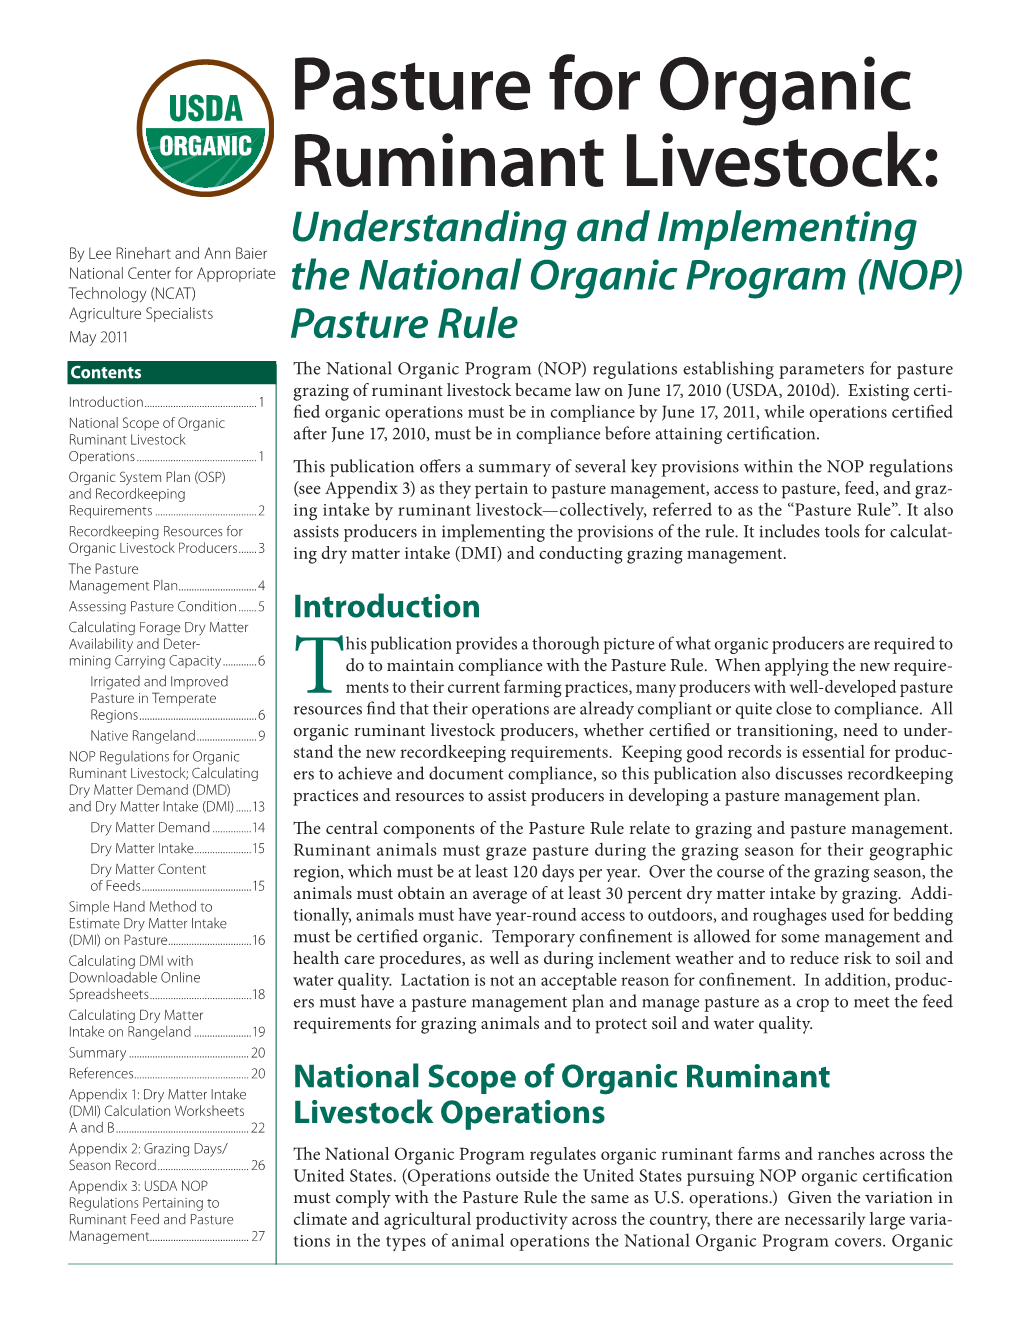 The Organic Pasture Rule